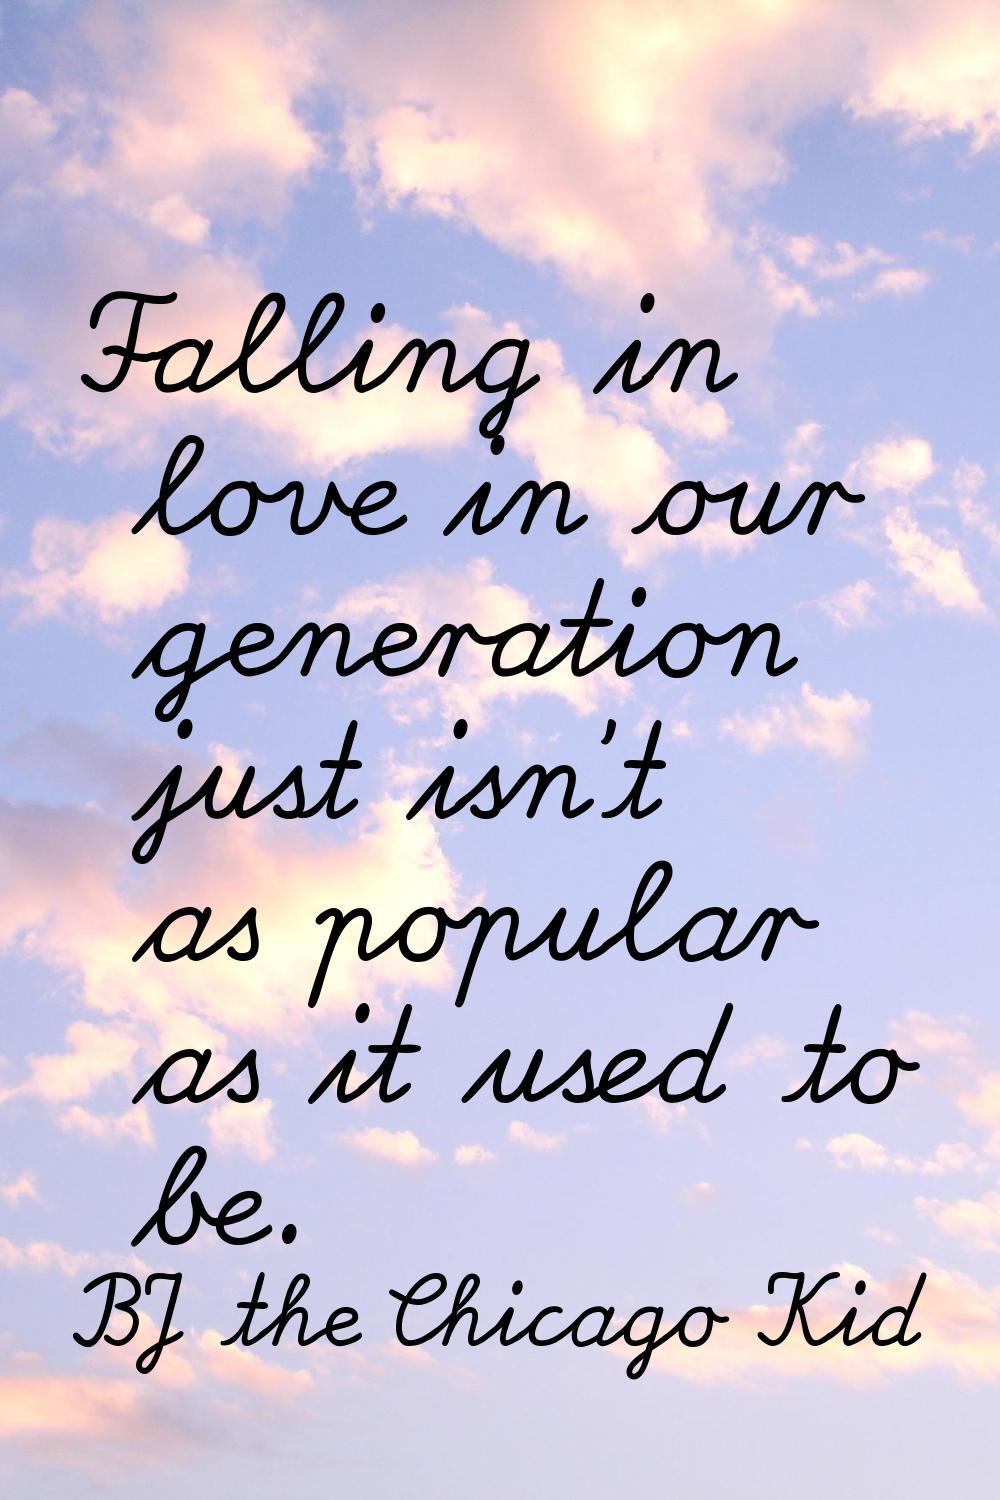 Falling in love in our generation just isn't as popular as it used to be.